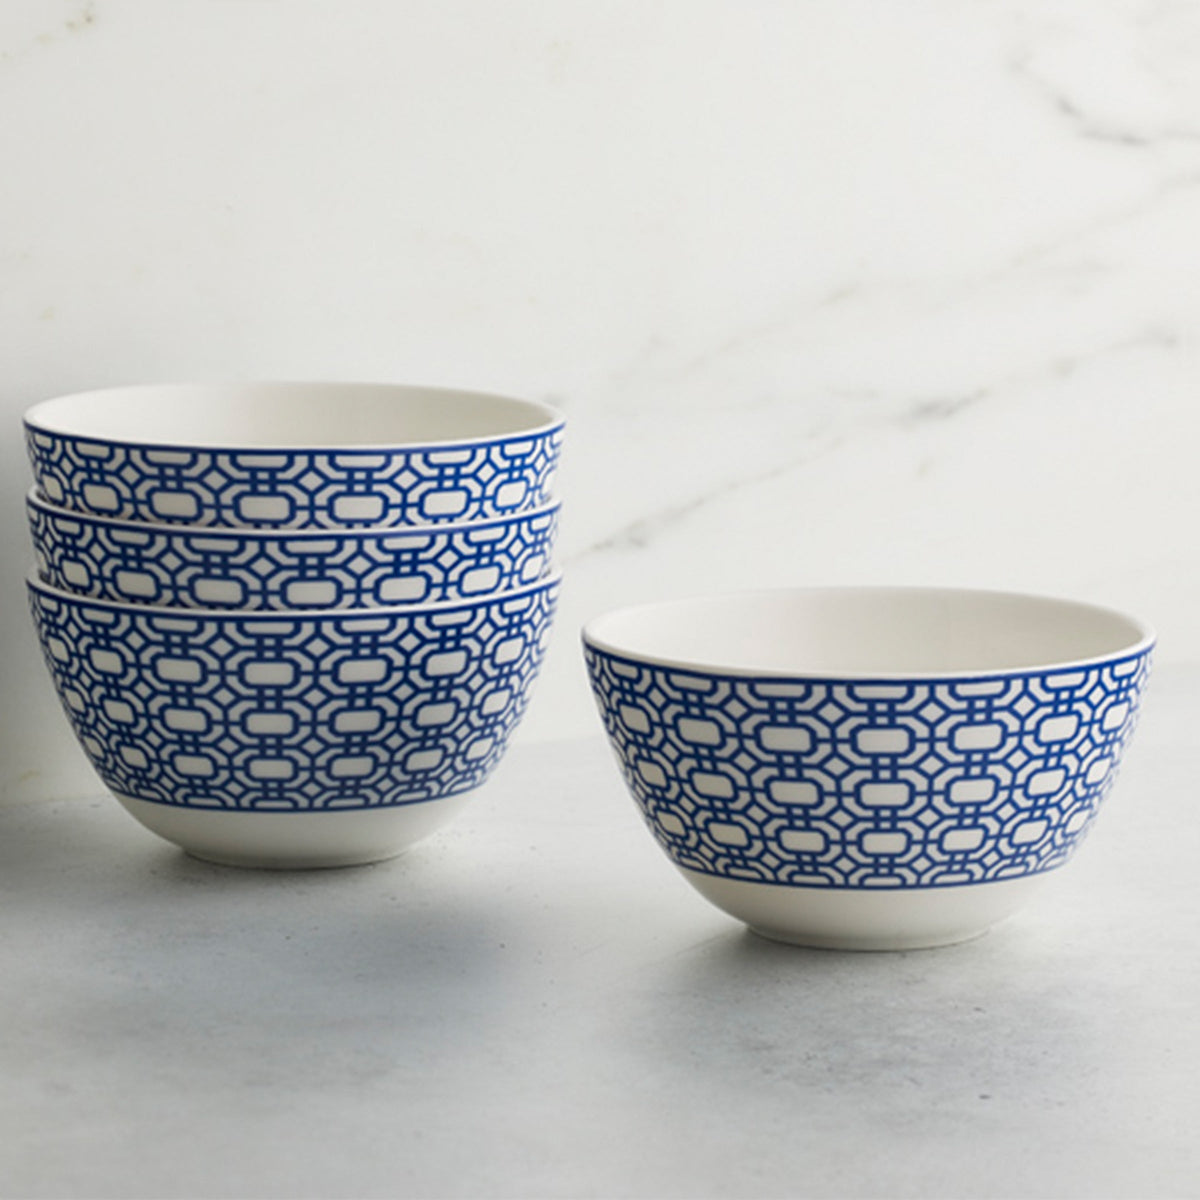 Three Caskata Artisanal Home Newport Tall cereal bowls, with a modern appeal, on a marble surface.